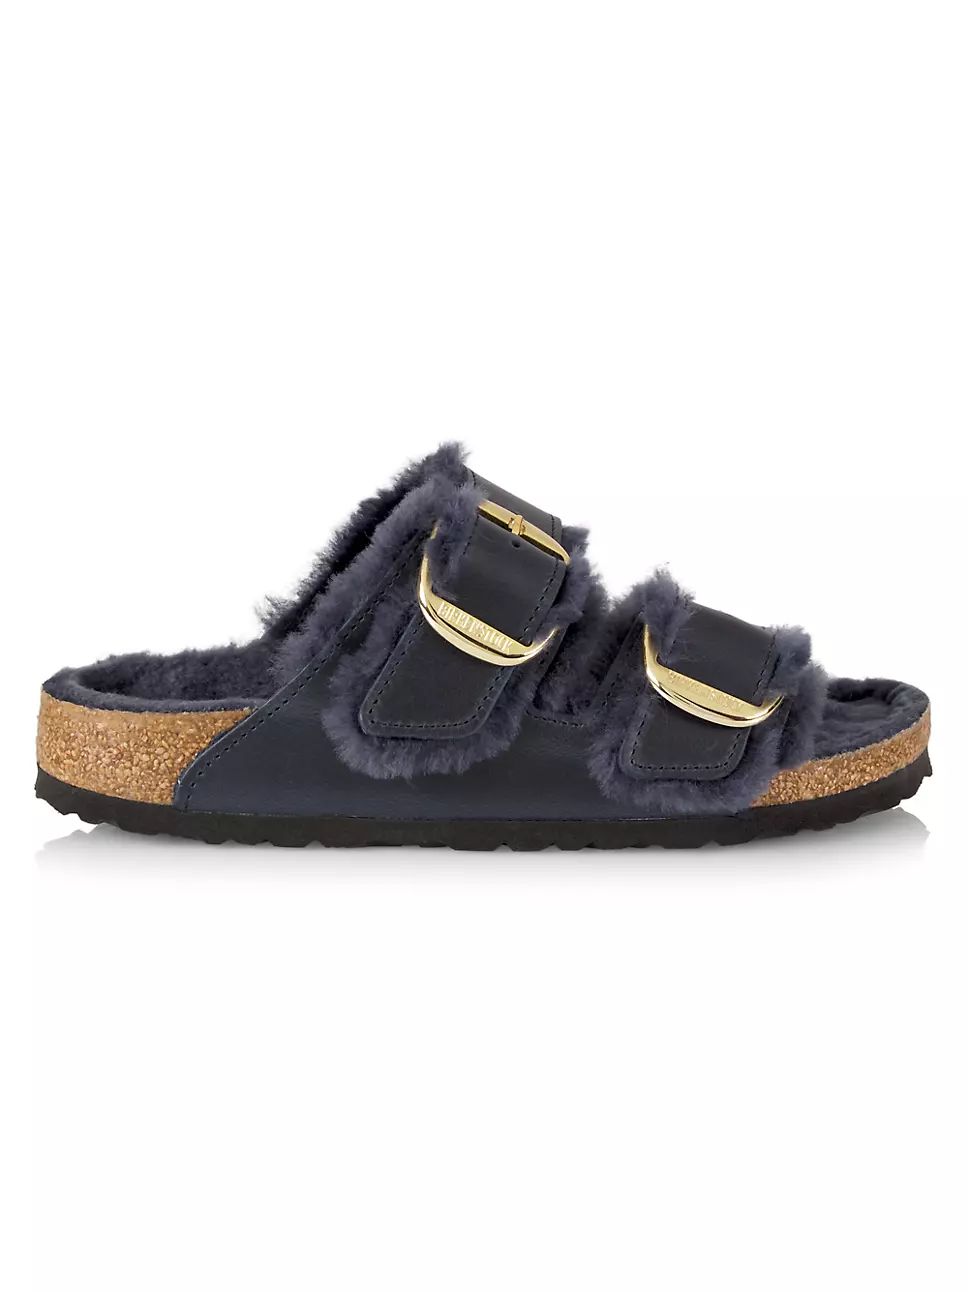 Arizona Big Buckle Shearling-Lined Leather Sandals | Saks Fifth Avenue